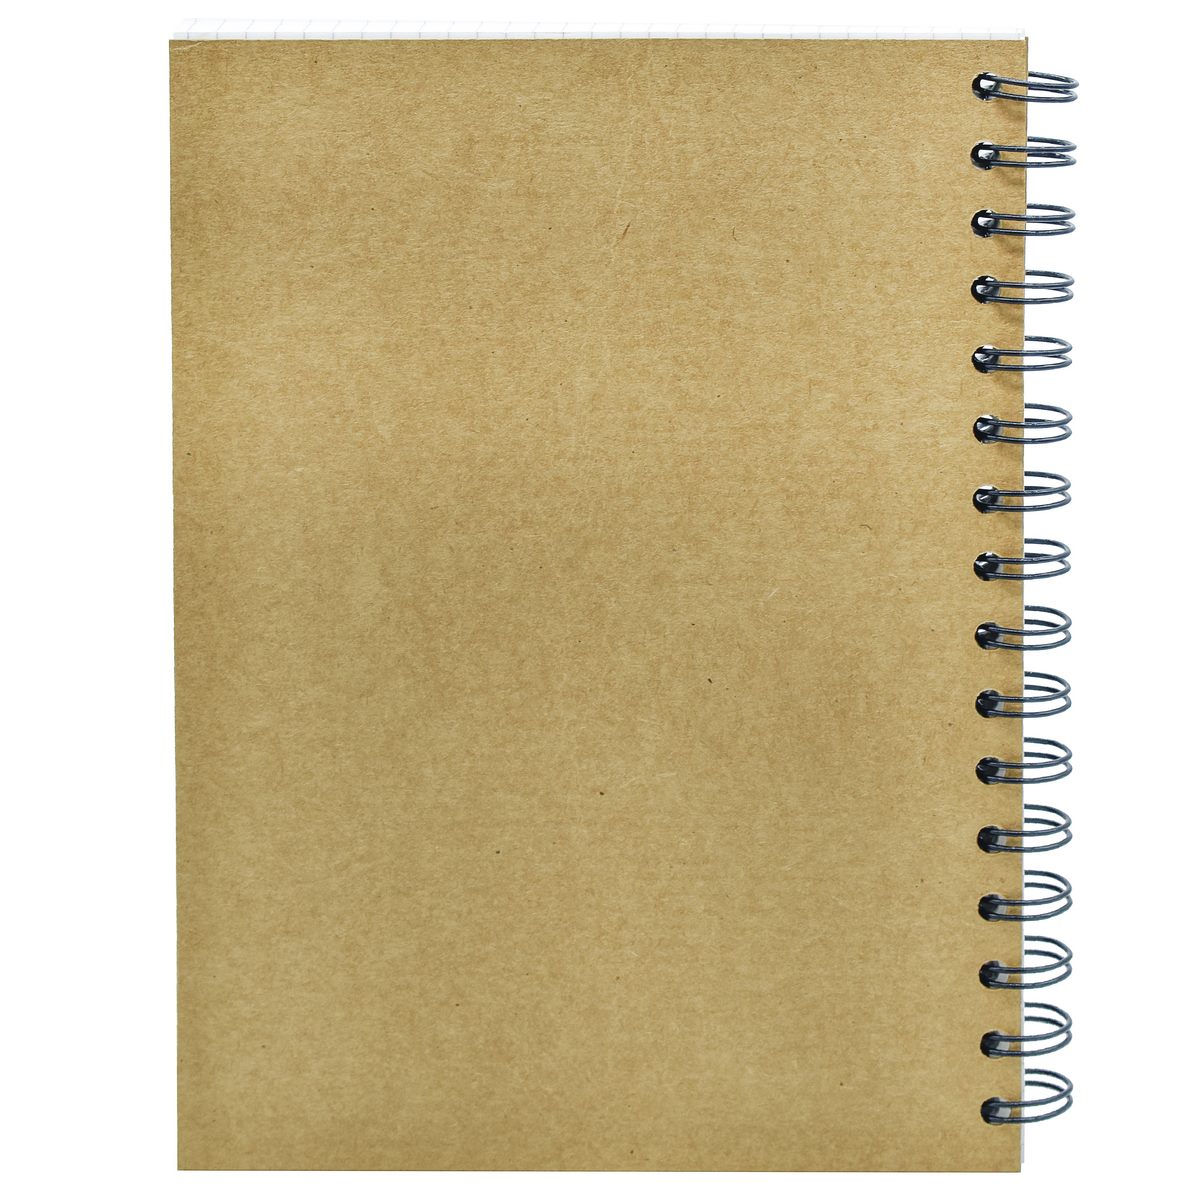 jags-mumbai Notebooks & Diaries Square Grid Notebook, A5 Square Graph 5MM, Kraft Cover, (A5) (Single Book)